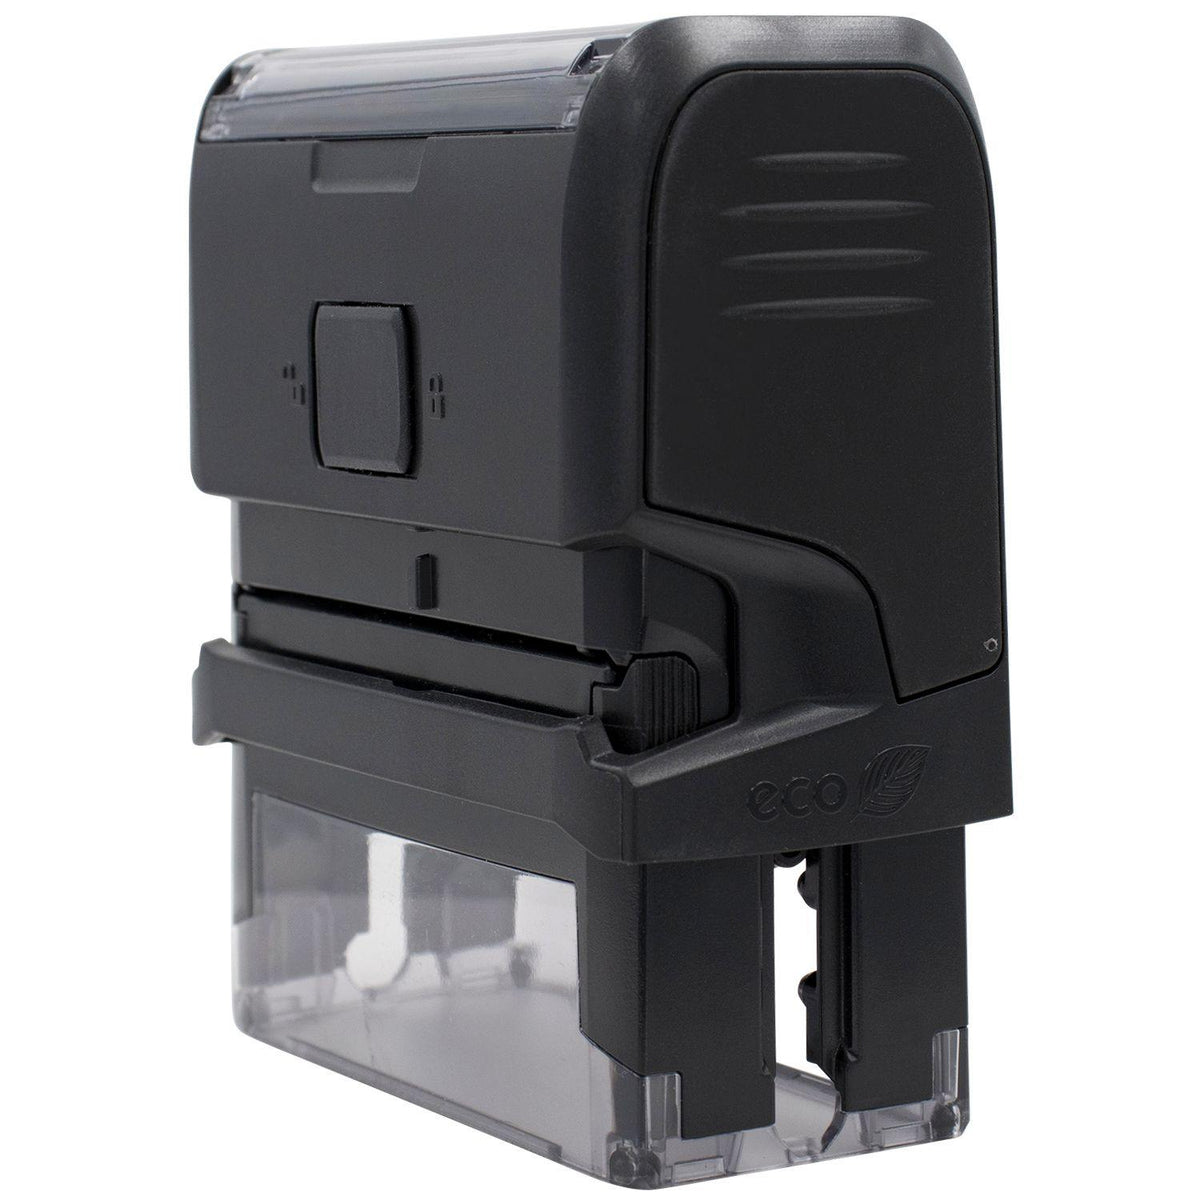 Large Self-Inking File with Envelope Stamp - Engineer Seal Stamps - Brand_Trodat, Impression Size_Large, Stamp Type_Self-Inking Stamp, Type of Use_General, Type of Use_Office